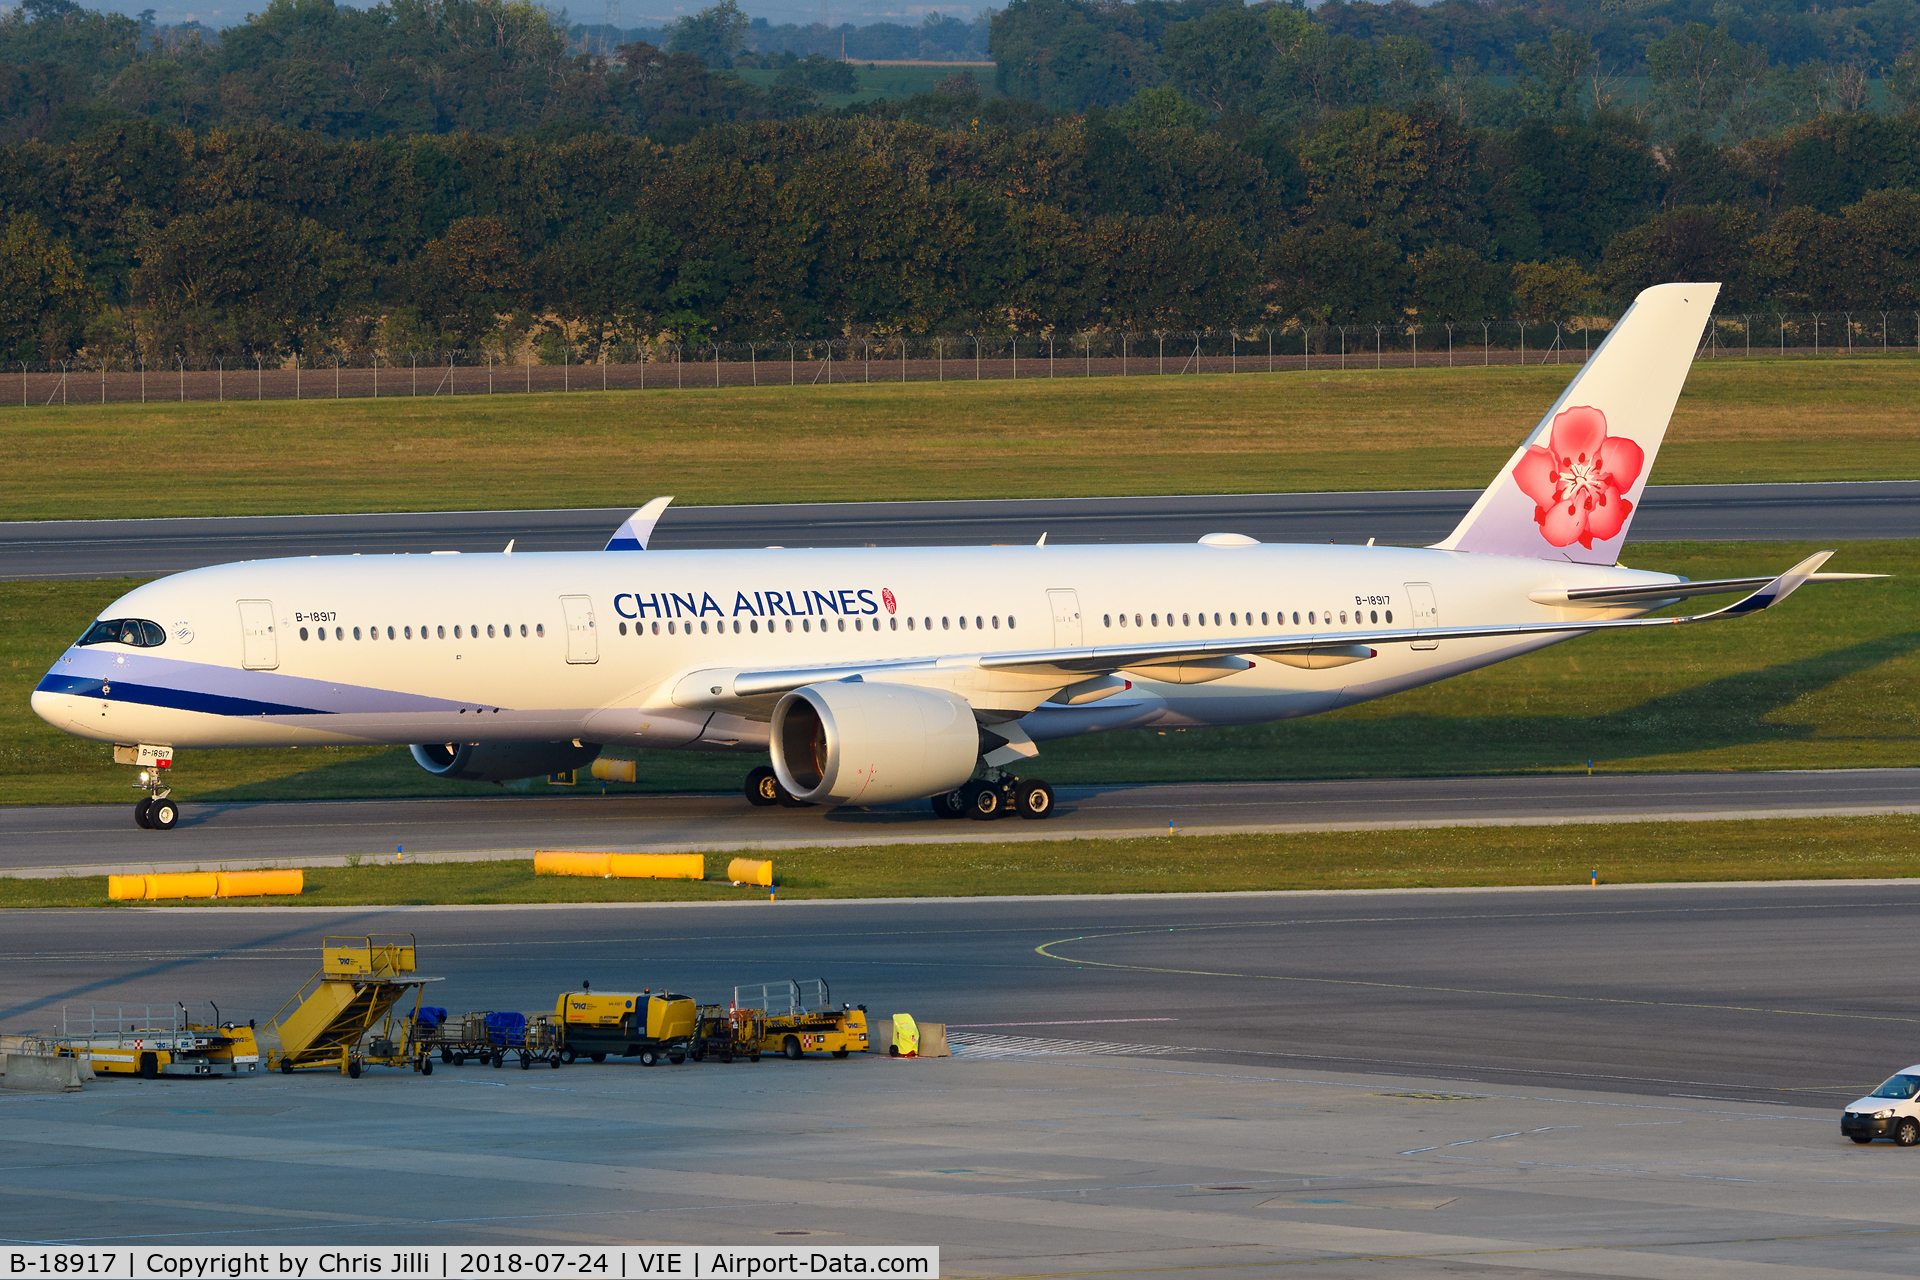 B-18917, 2018 Airbus A350-941 C/N 208, China Airlines